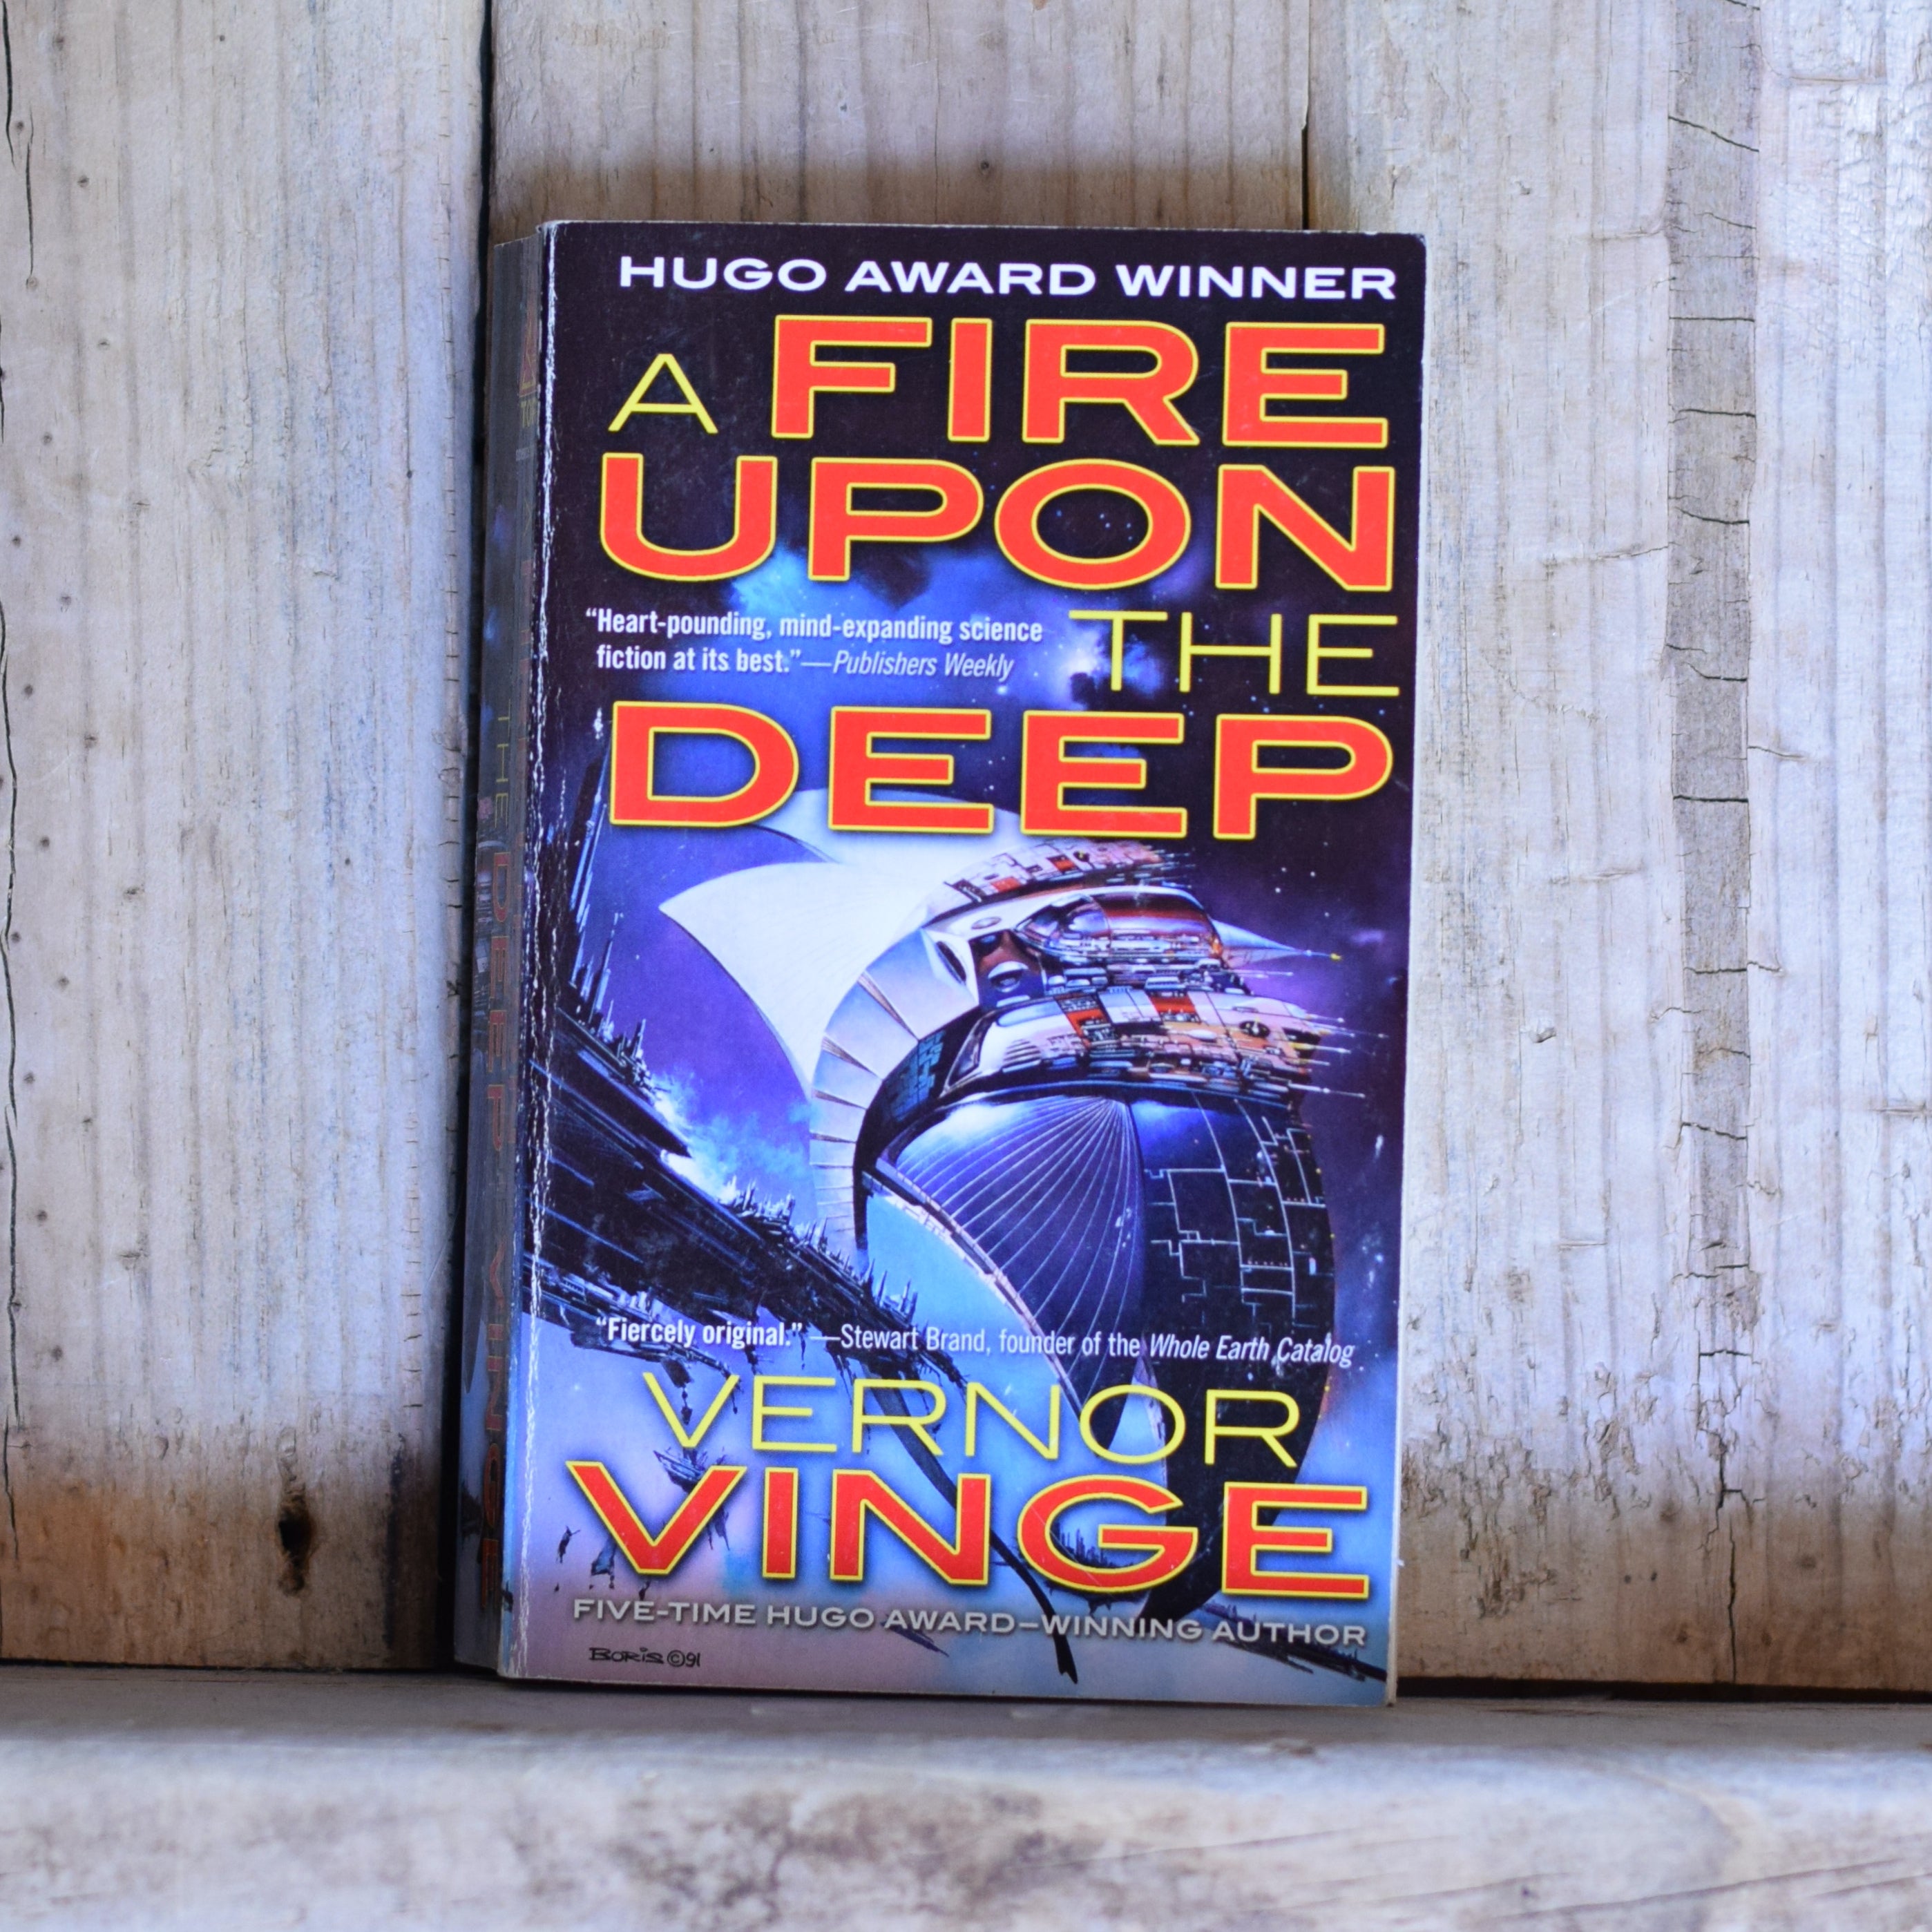 The Witling by Vernor Vinge 1976 First Printing Daw Paperback 